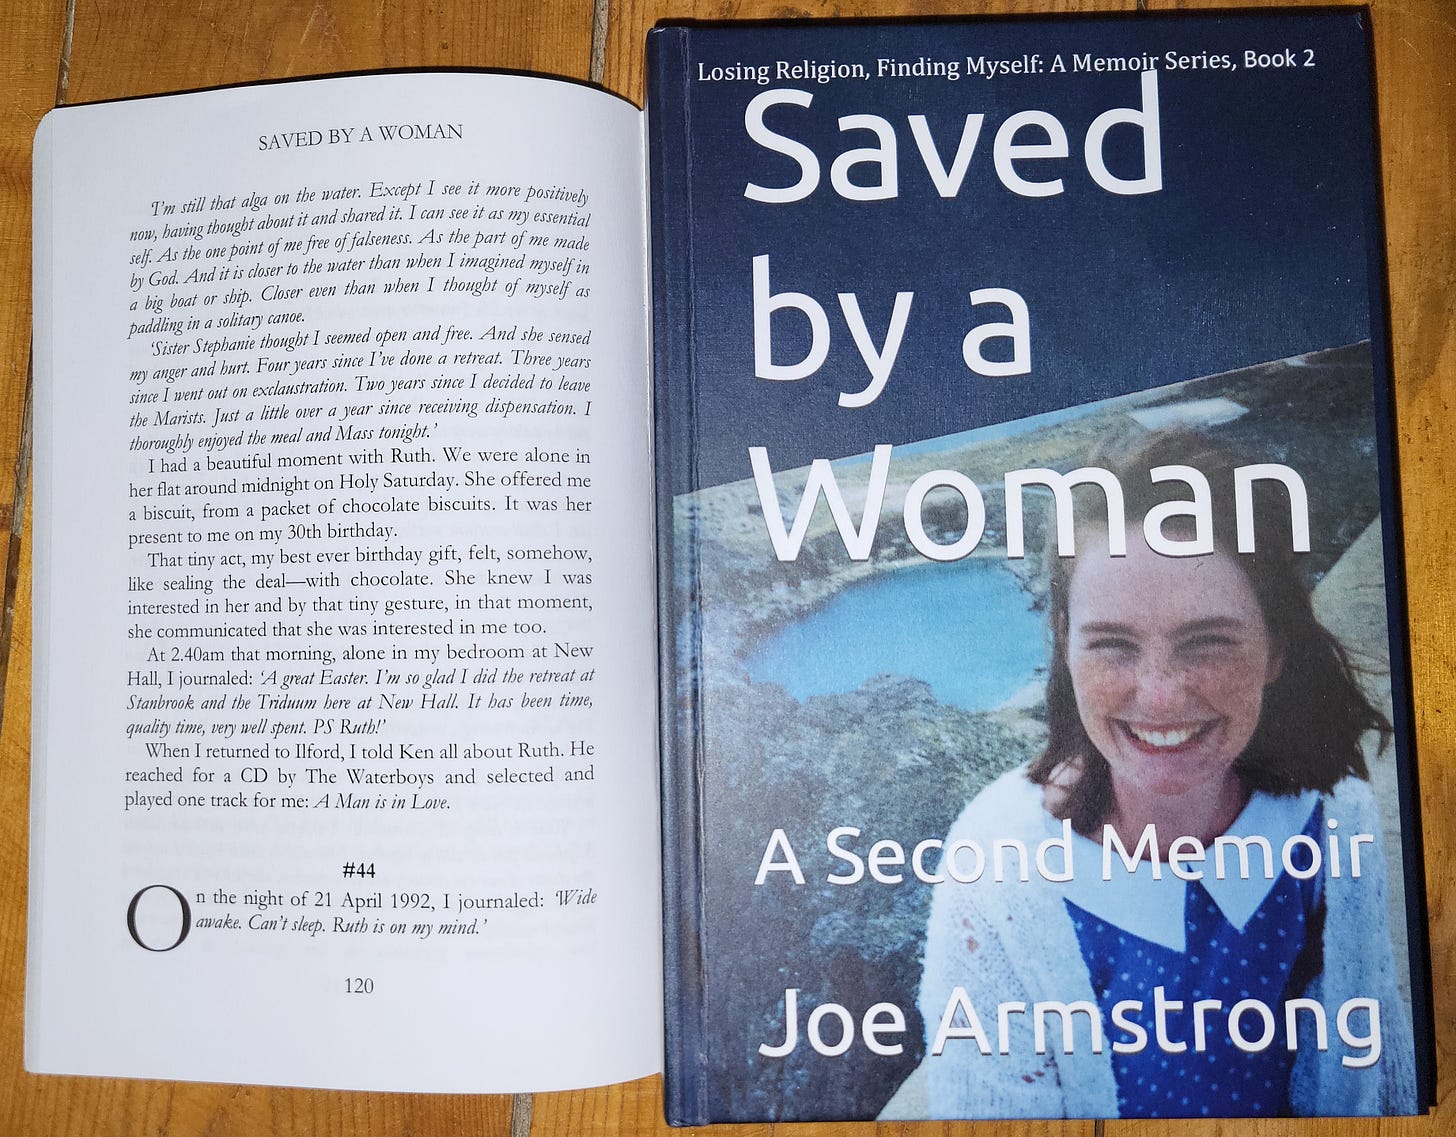 Cover of Saved by a Woman, with an open page recording Joe Armstrong's experience of falling in love with Ruth.